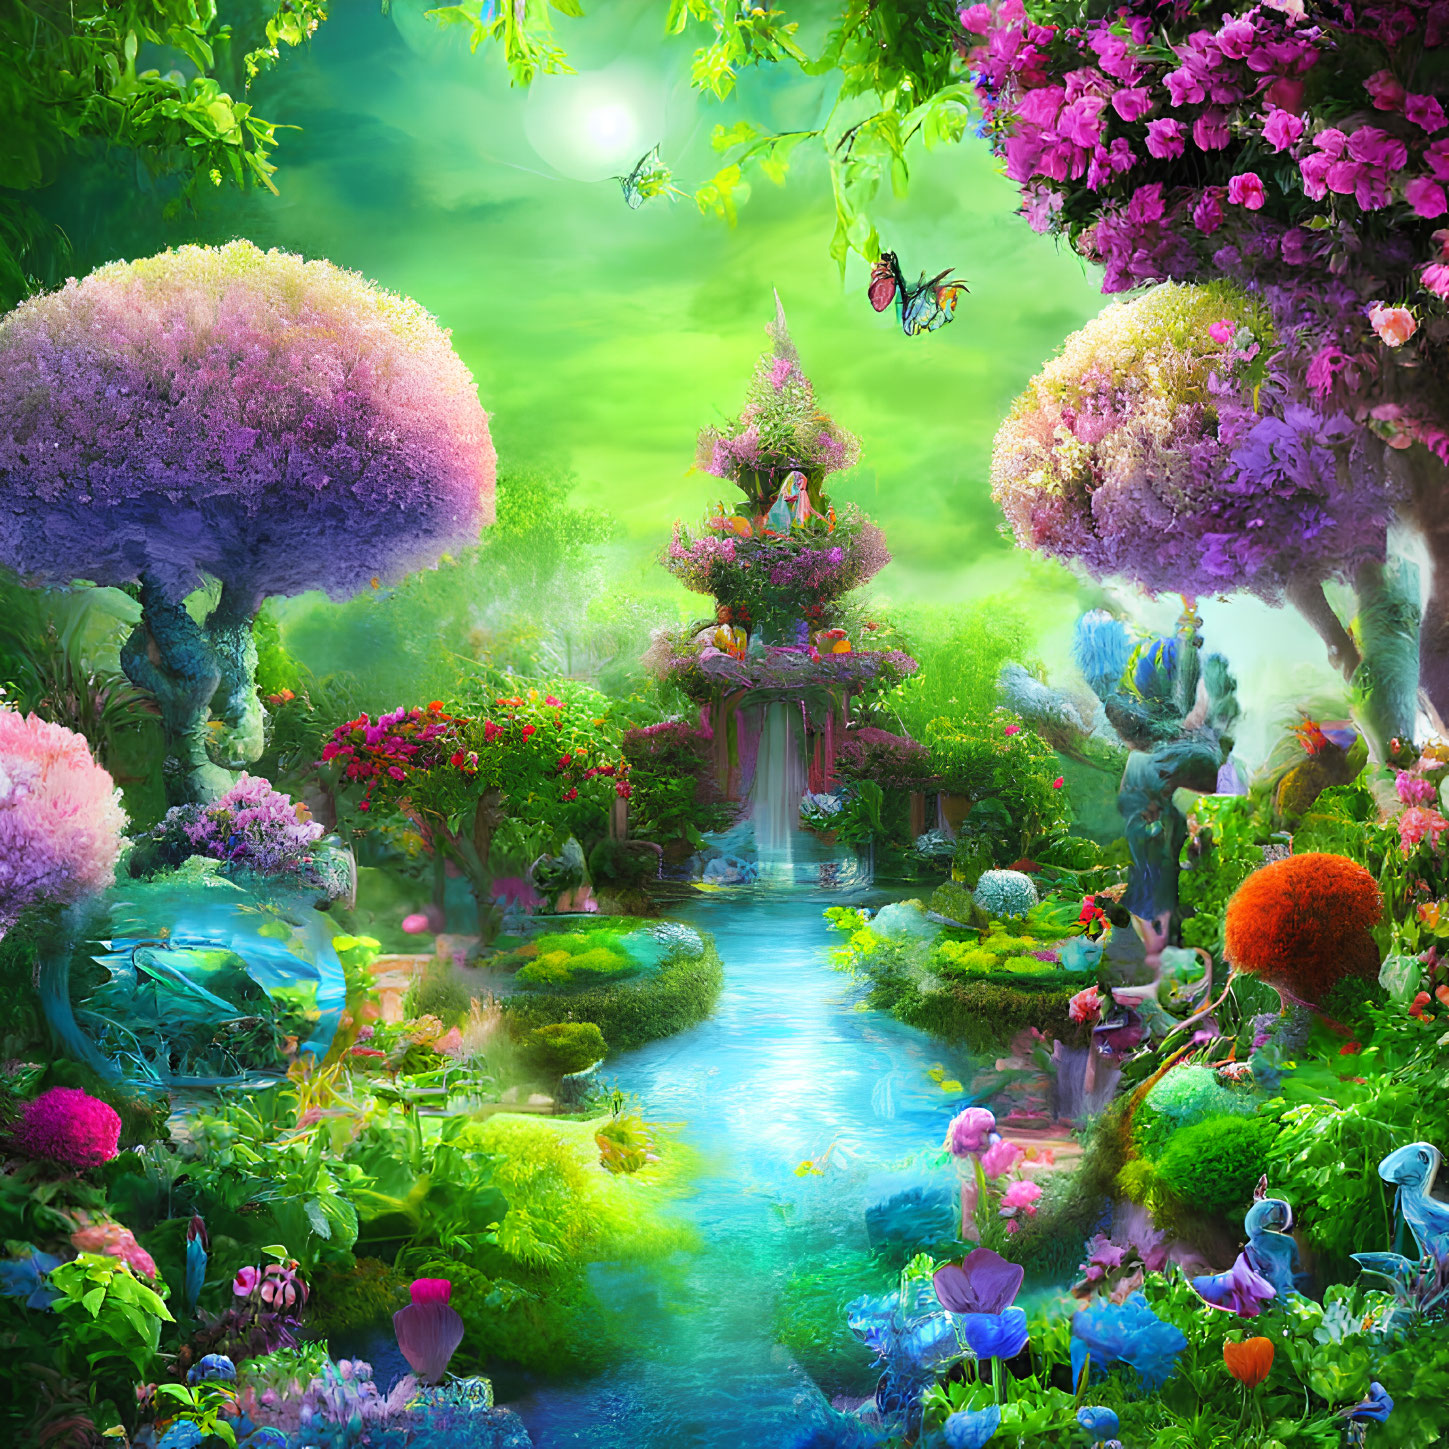 Fantasy garden with lush foliage, colorful flora, statues, and serene river